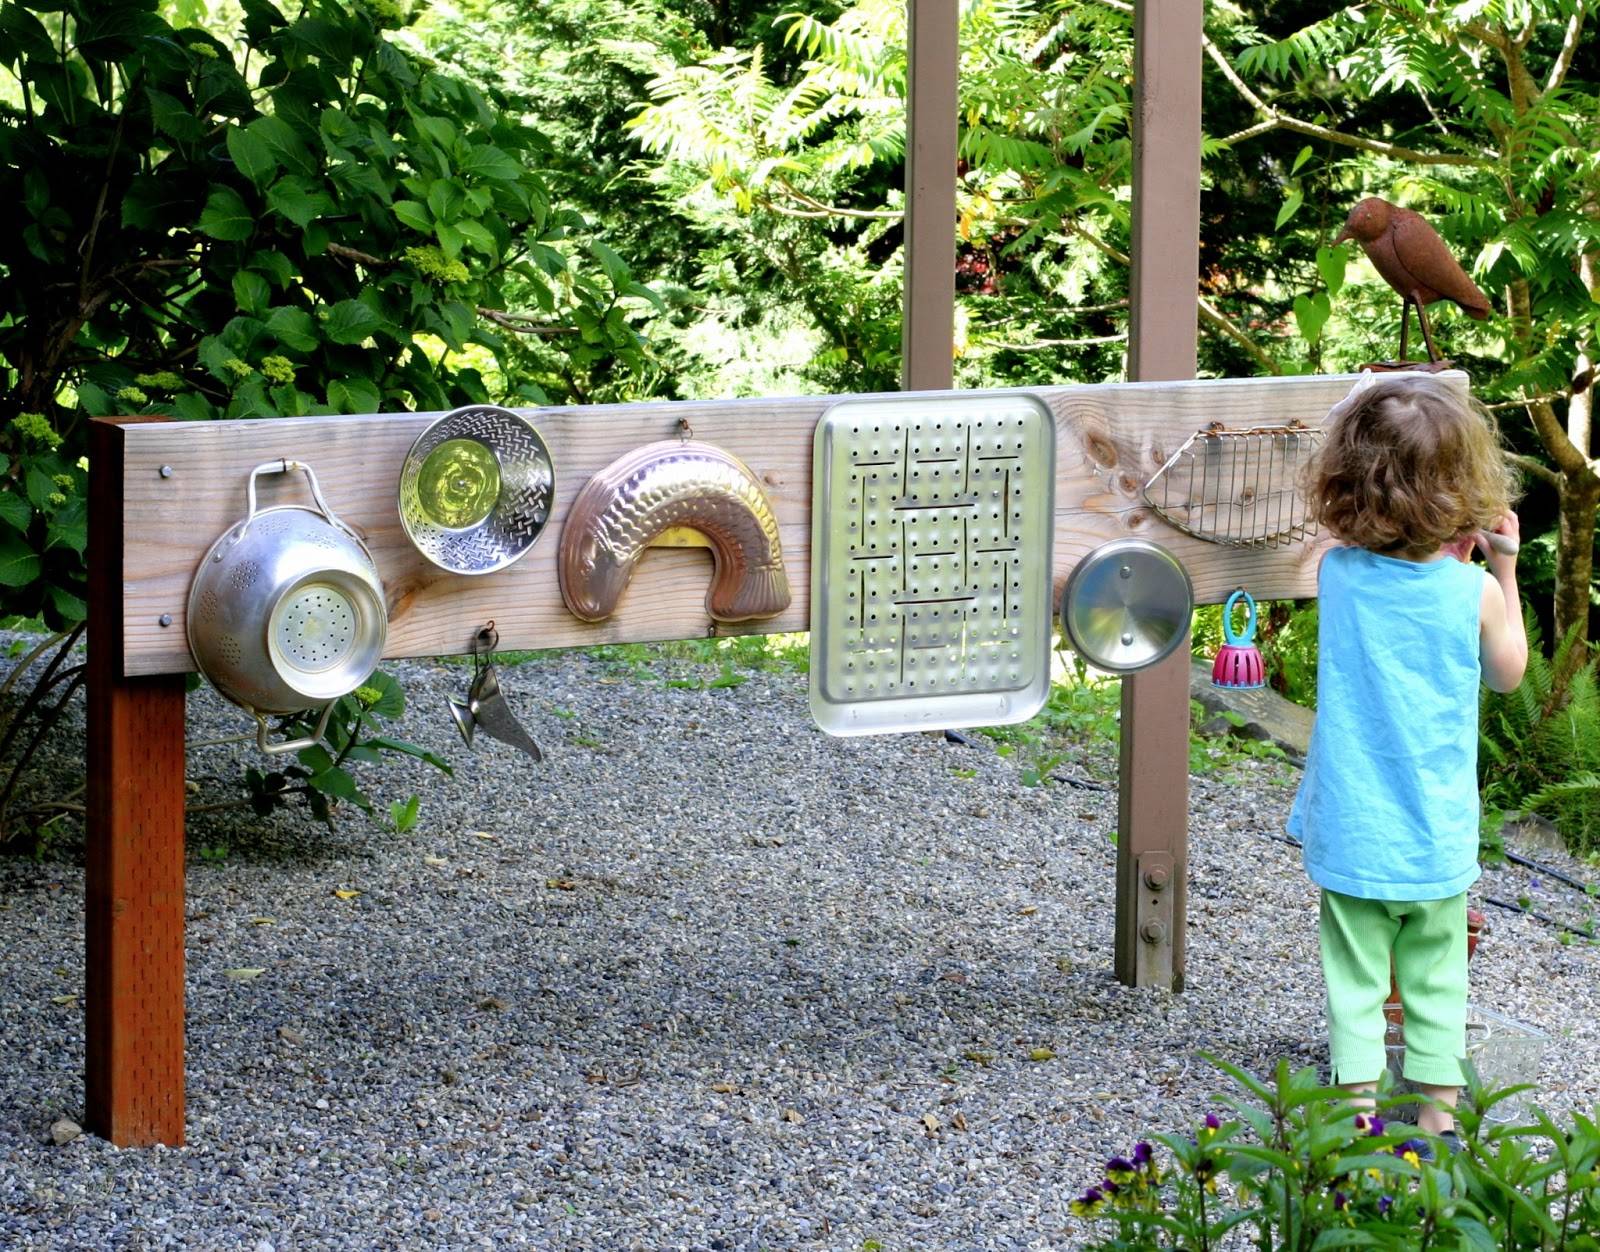 Little girl in blue facing different metal wares hanging on a wood